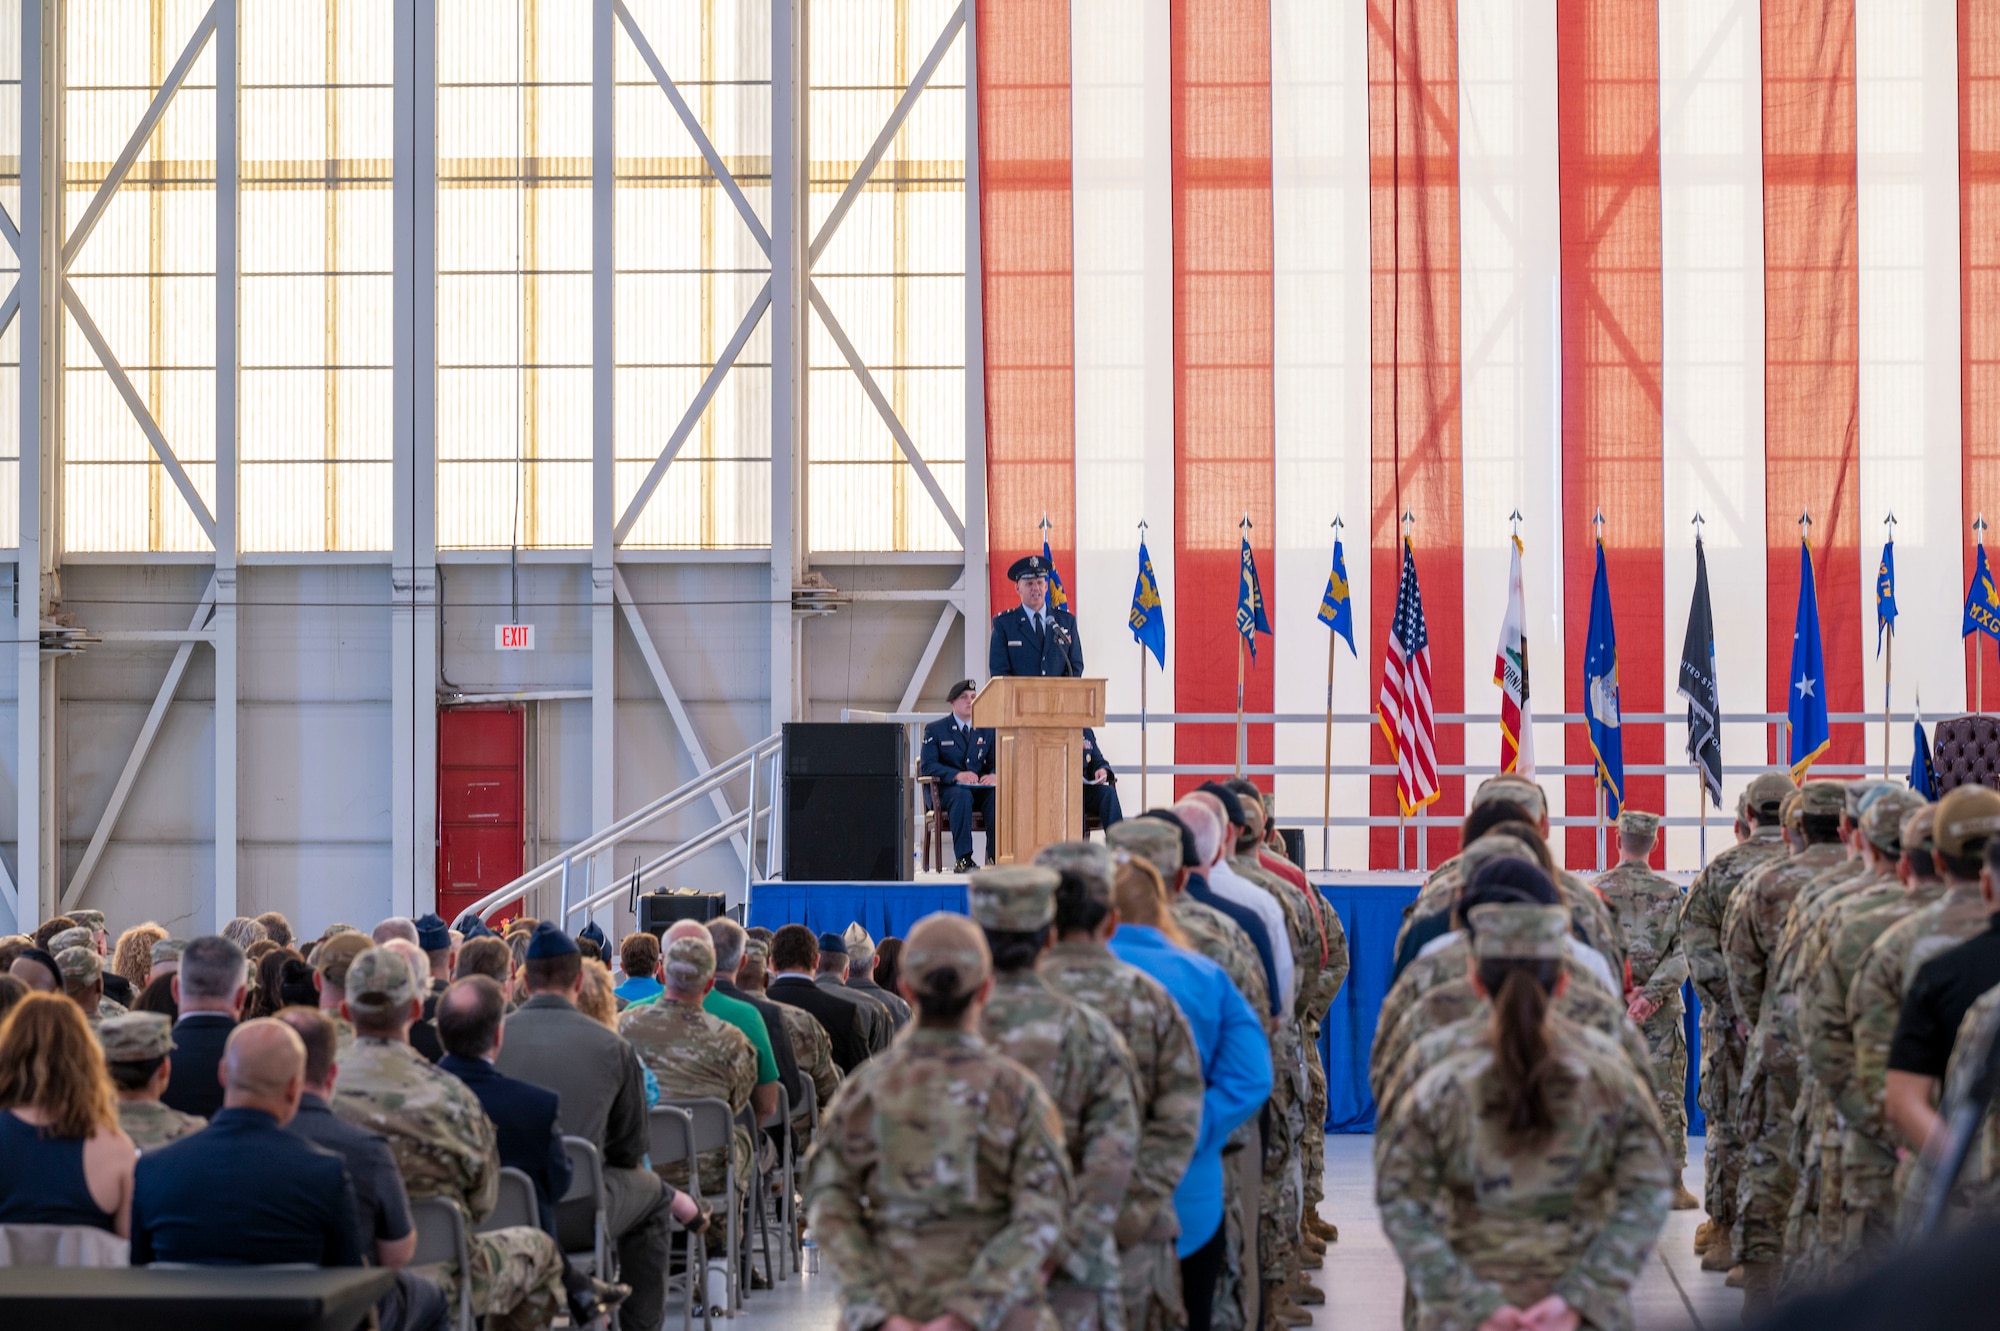 Maj. Gen. Evan Dertien, Air Force Test Center commander, gives remarks during the 412th Test Wing Change of Command Ceremony between outgoing commander, Brig. Gen. Matthew Higer and incoming commander, Col. Douglas Wickert, at Edwards Air Force Base, California, Aug.18.